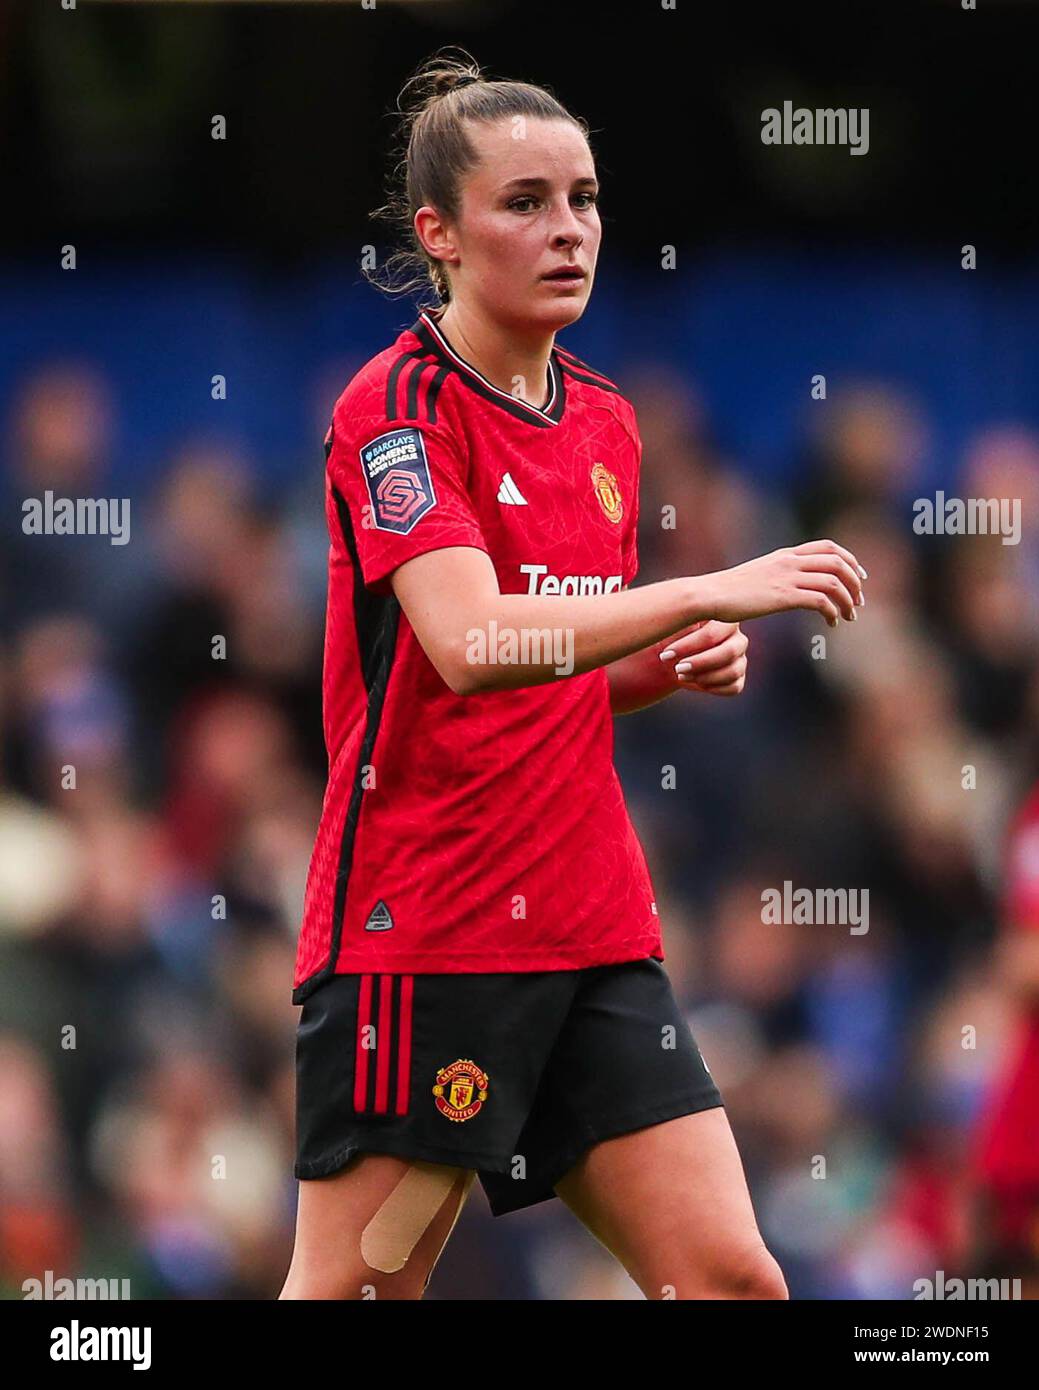 London, England, United Kingdom on 21 January 2024. Manchester United's Ella Toone in action during the Chelsea Women v Manchester United Women Barclays Women's Super League match at Stamford Bridge, London, England, United Kingdom on 21 January 2024 Credit: Every Second Media/Alamy Live News Stock Photo